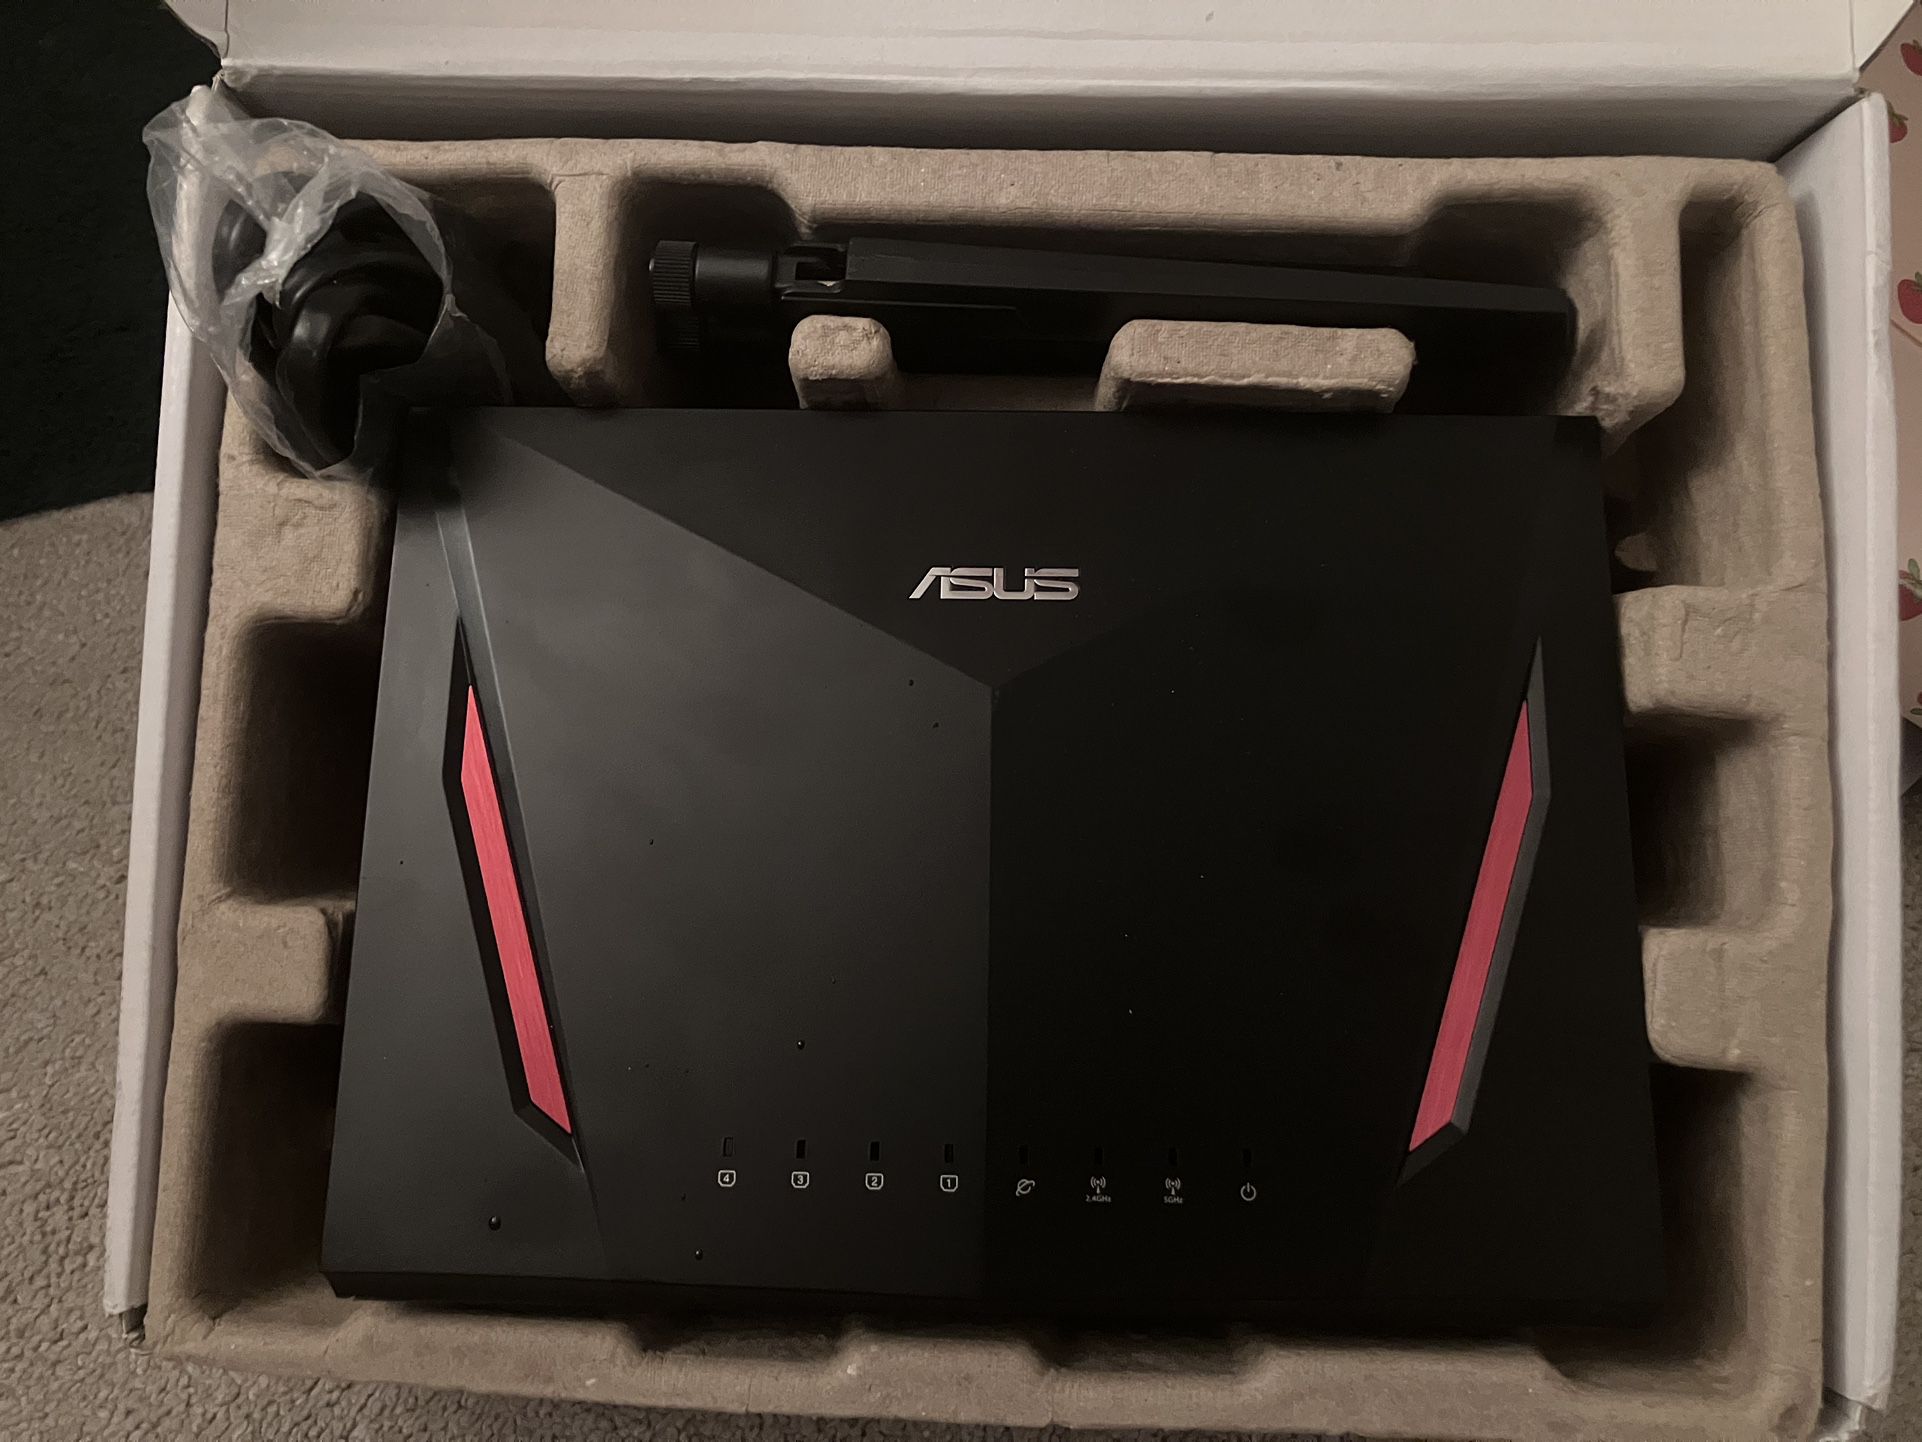 Asus Wireless Router 